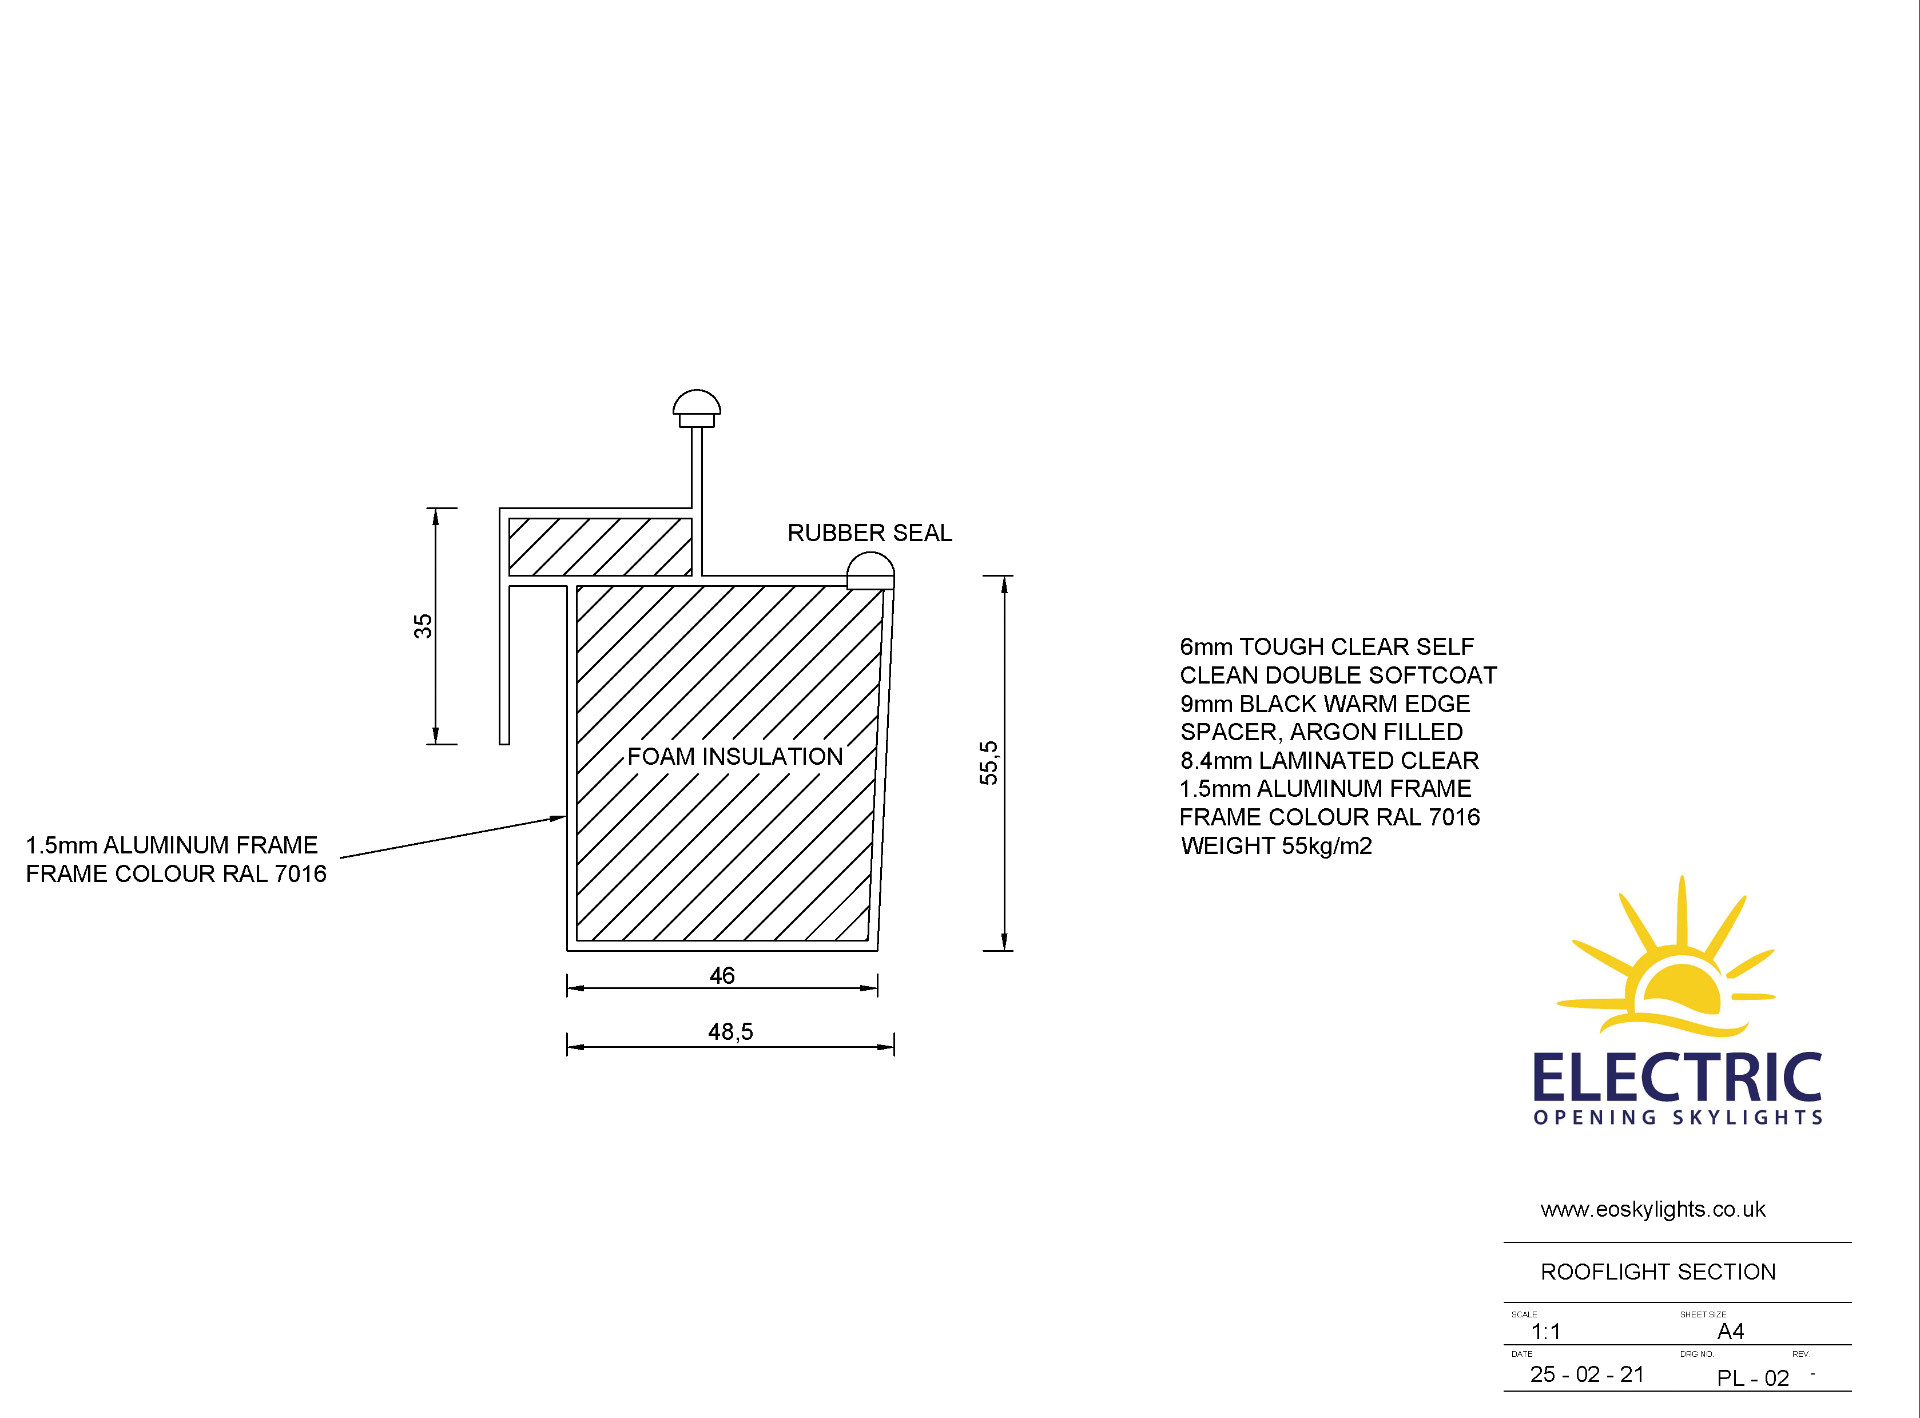 Panoroof (EOS) Electric Opening Skylight 1200x1200mm - Aluminiun Frame Double Glazed Laminated - Image 5 of 6